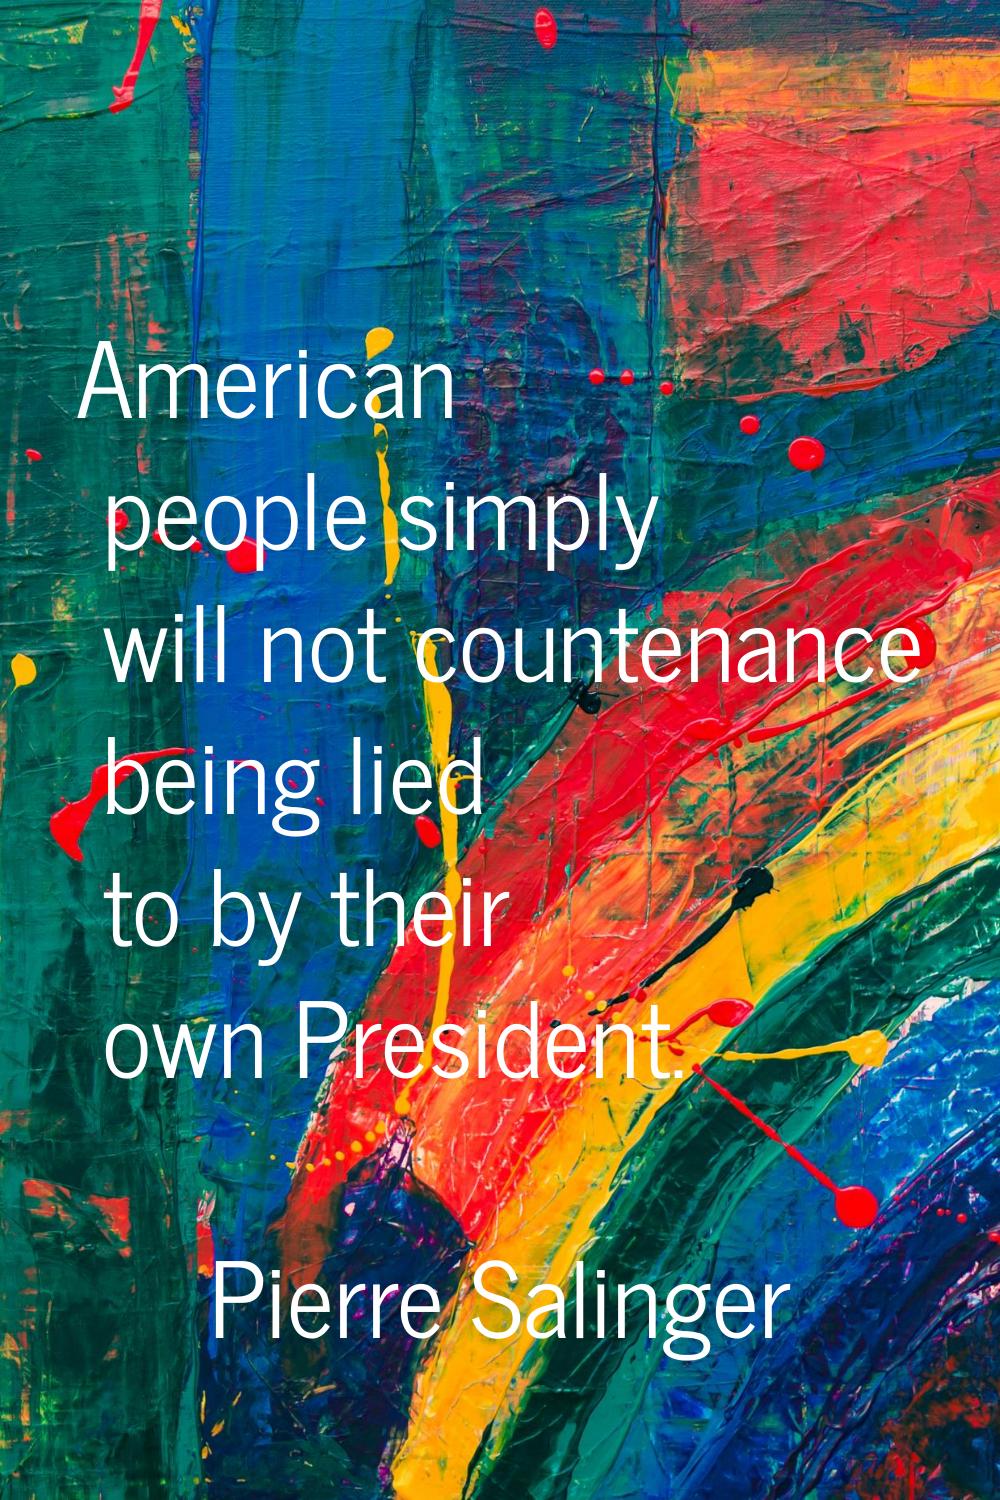 American people simply will not countenance being lied to by their own President.